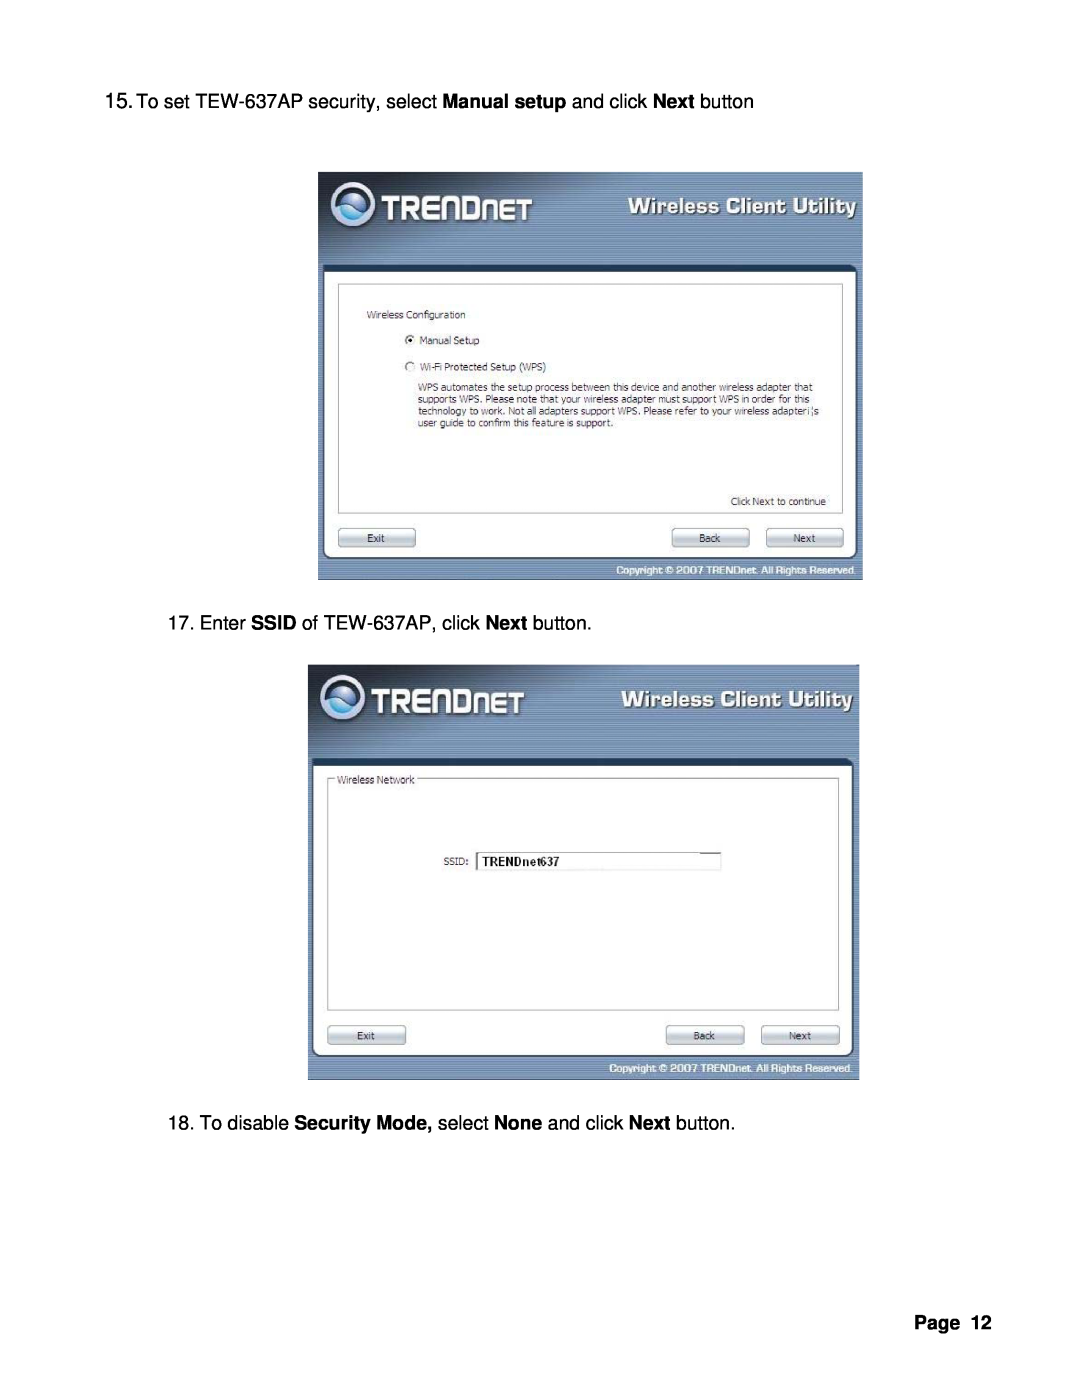 TRENDnet Enter SSID of TEW-637AP, click Next button, To disable Security Mode, select None and click Next button, Page 